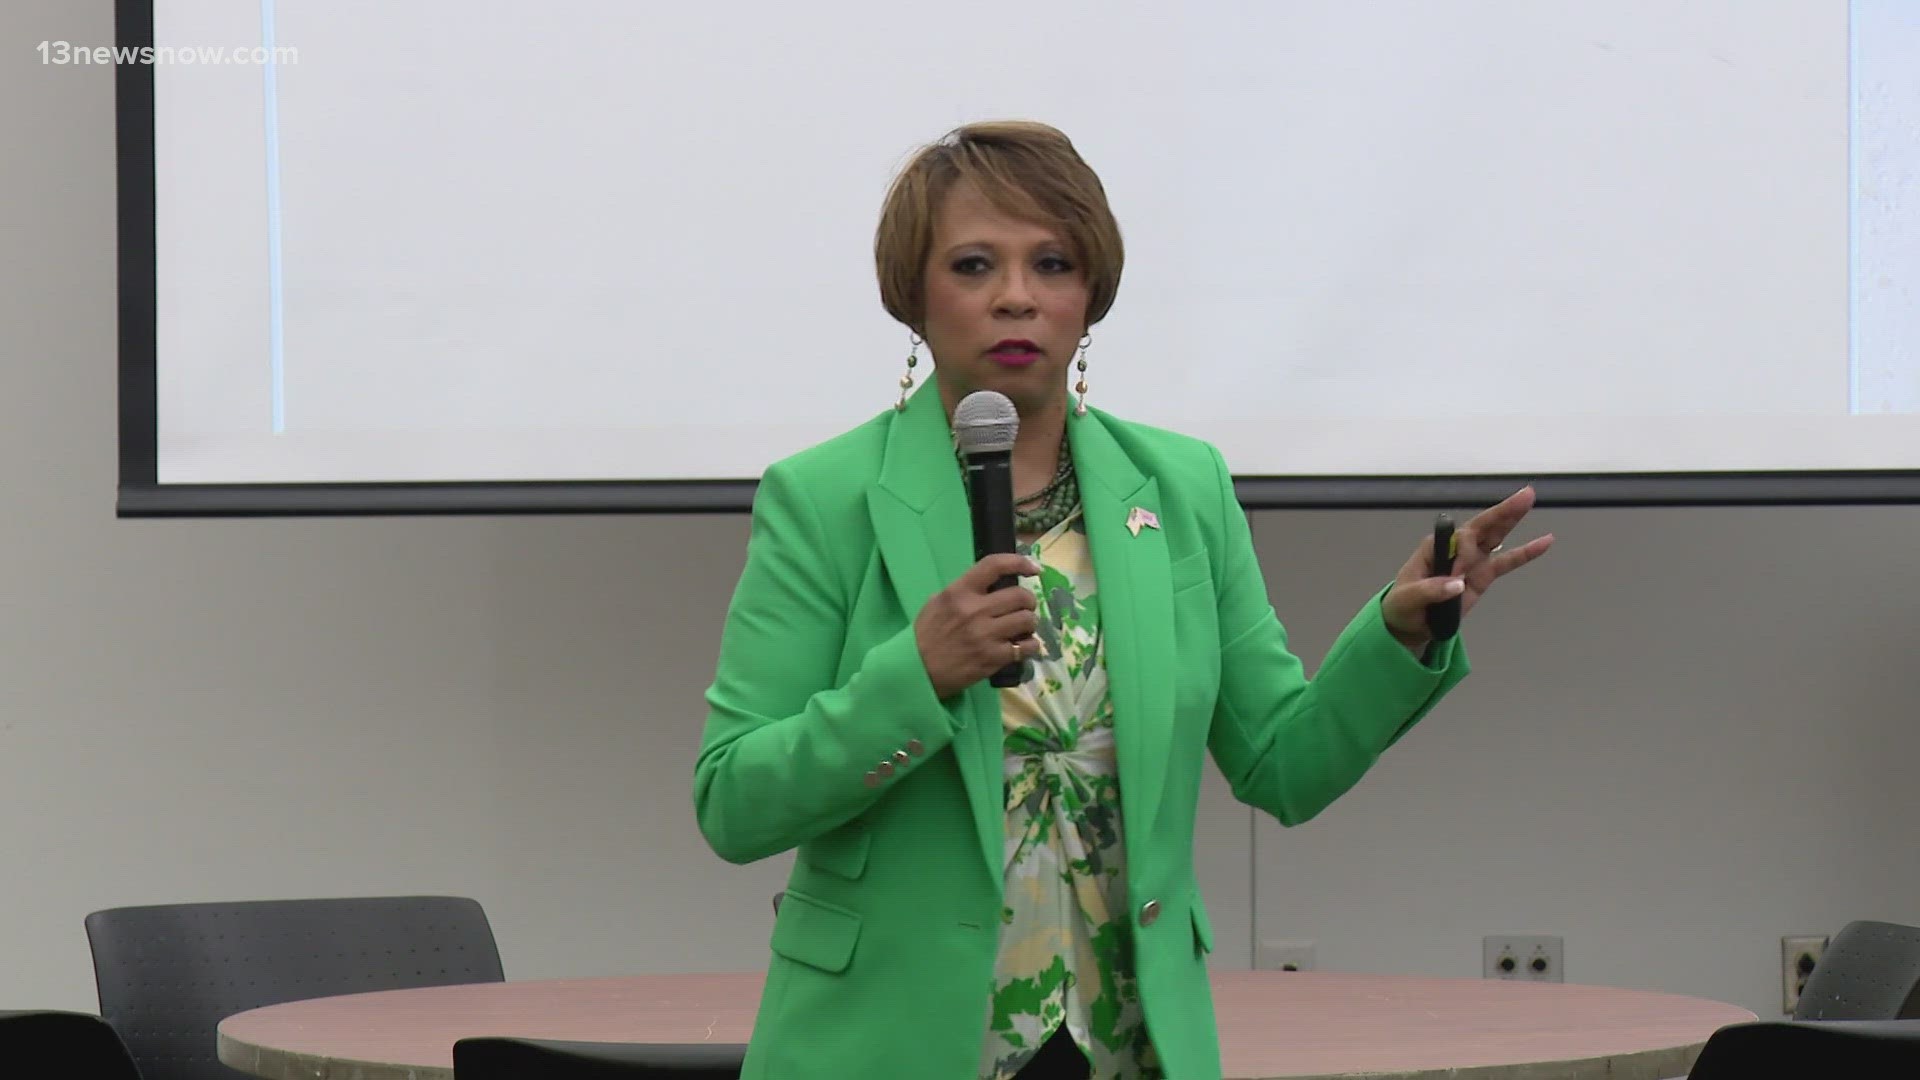 Best-selling author, journalist and legal analyst Sophia Nelson took some powerful self-care lessons to Norfolk State University.